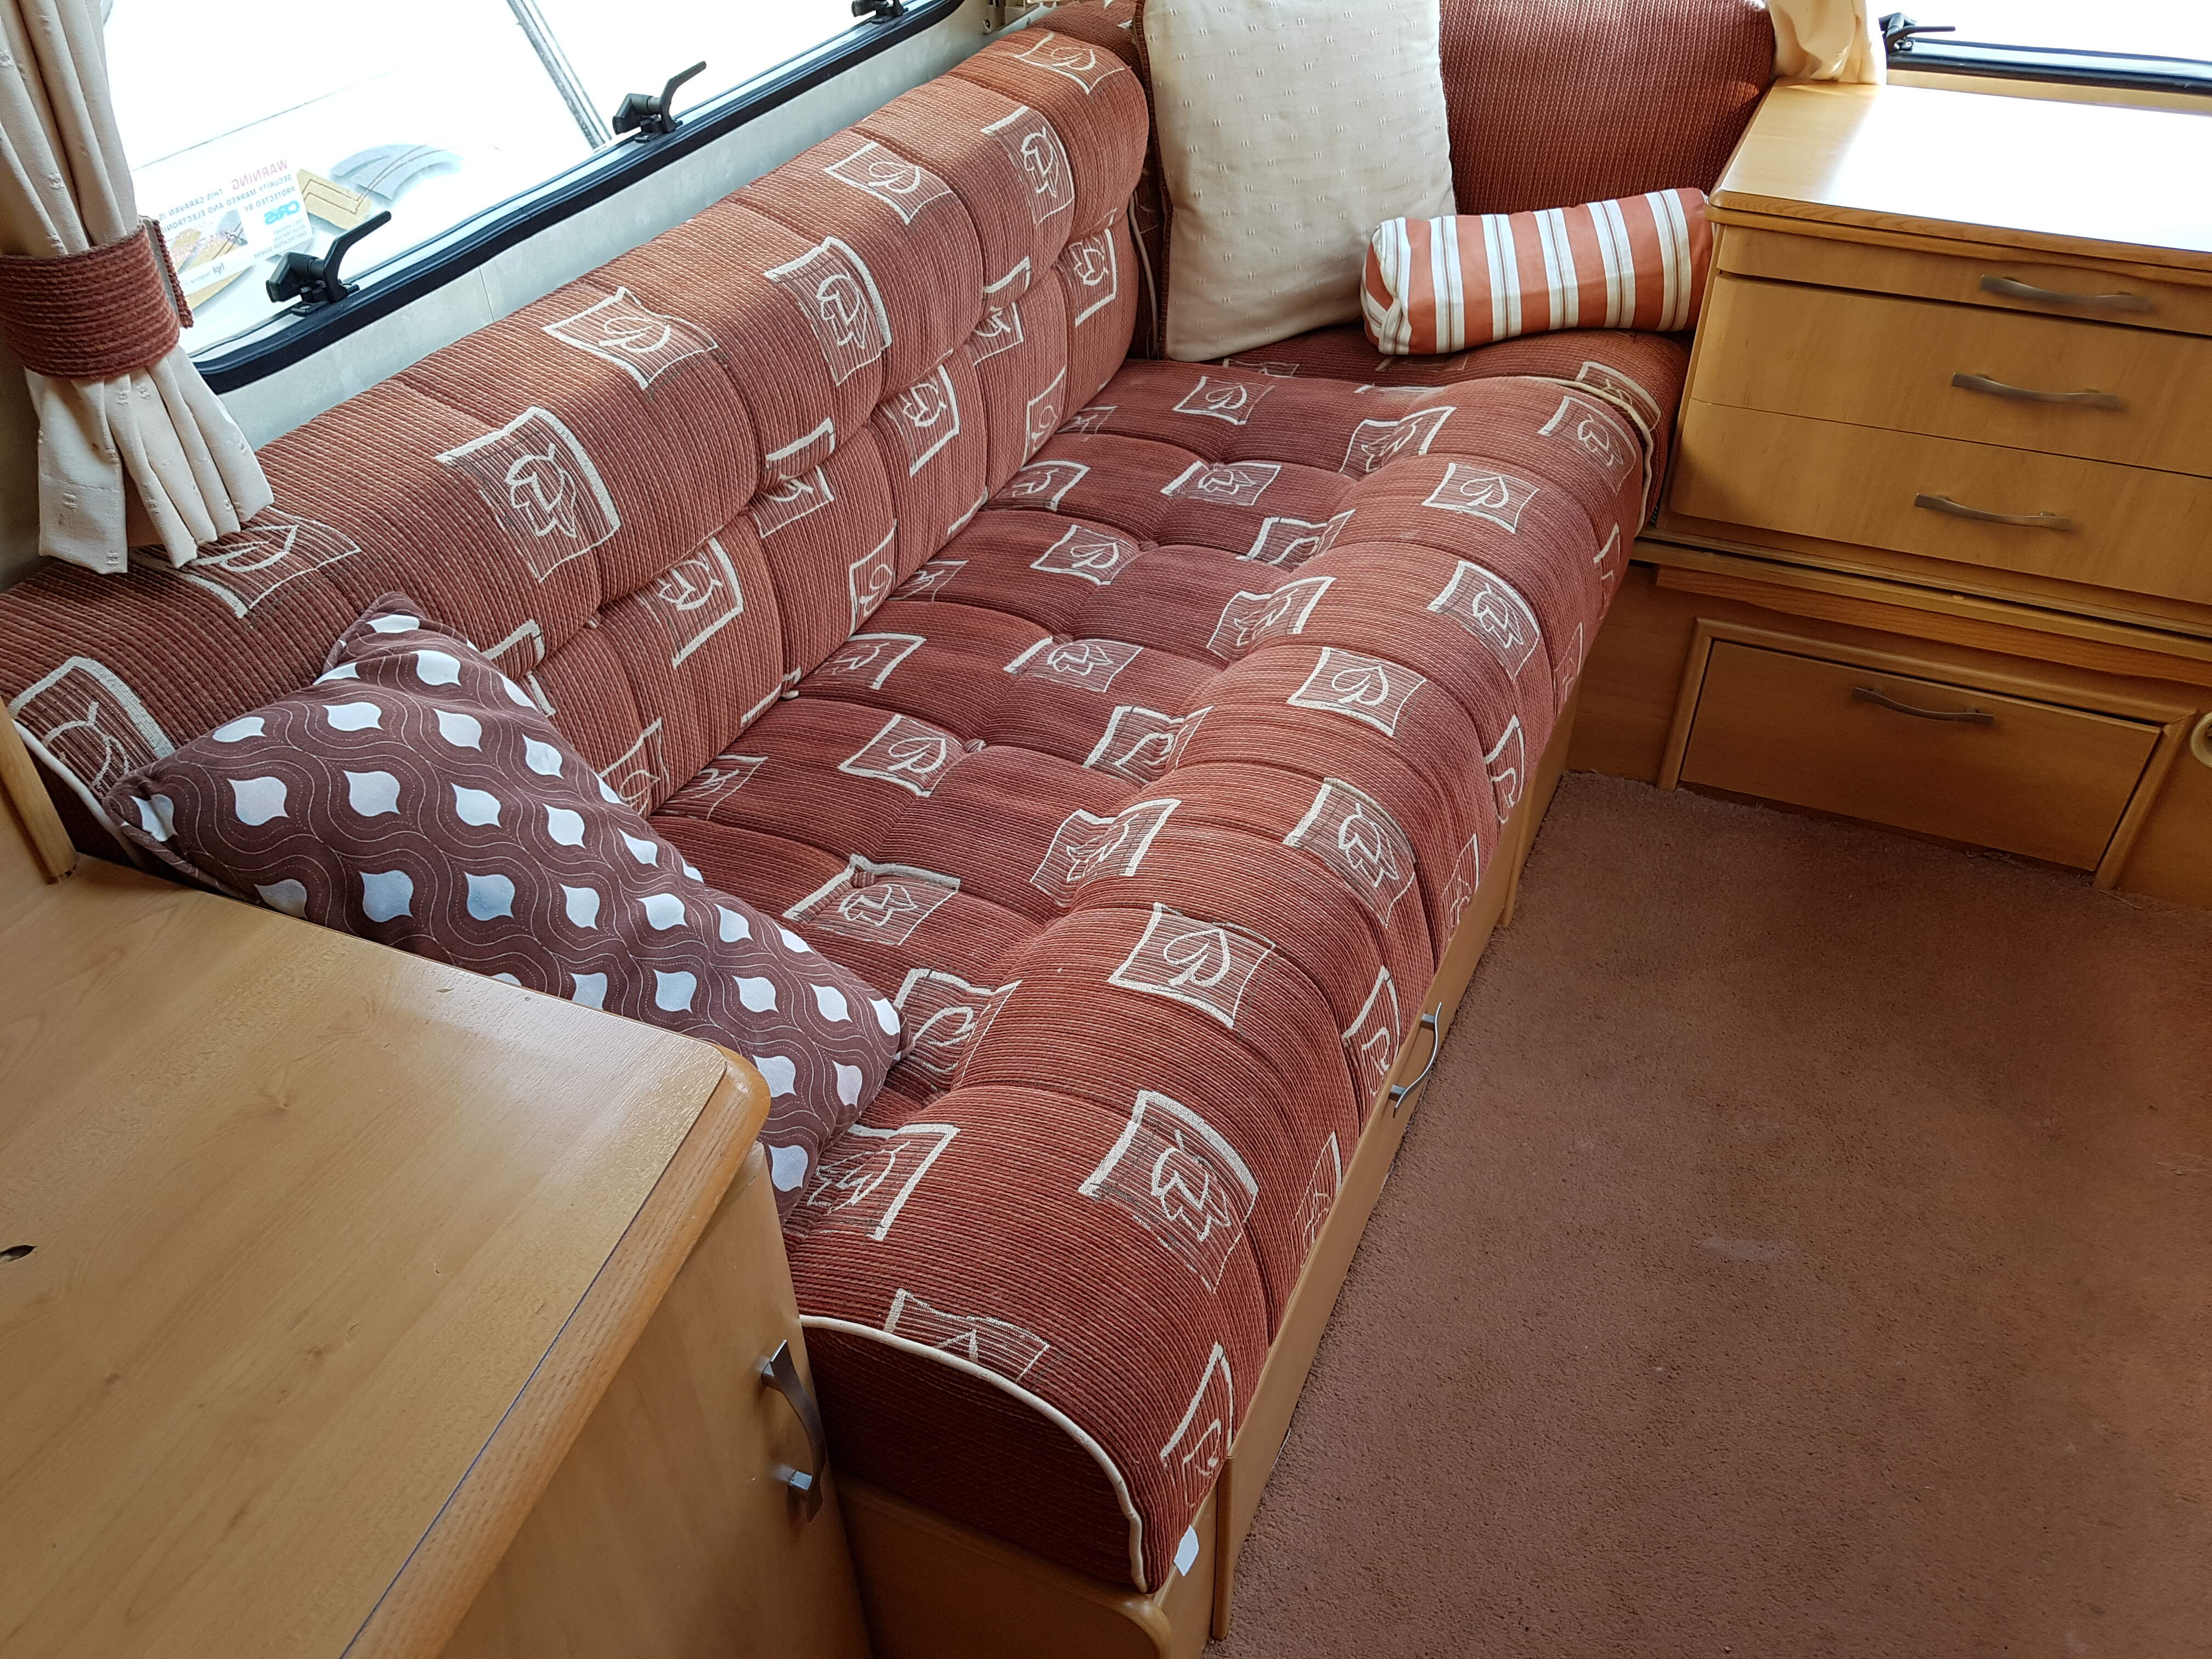 NOW SOLD 2003 Swift Charisma 570 6 Berth Fixed Bunks Side Dinette Caravan